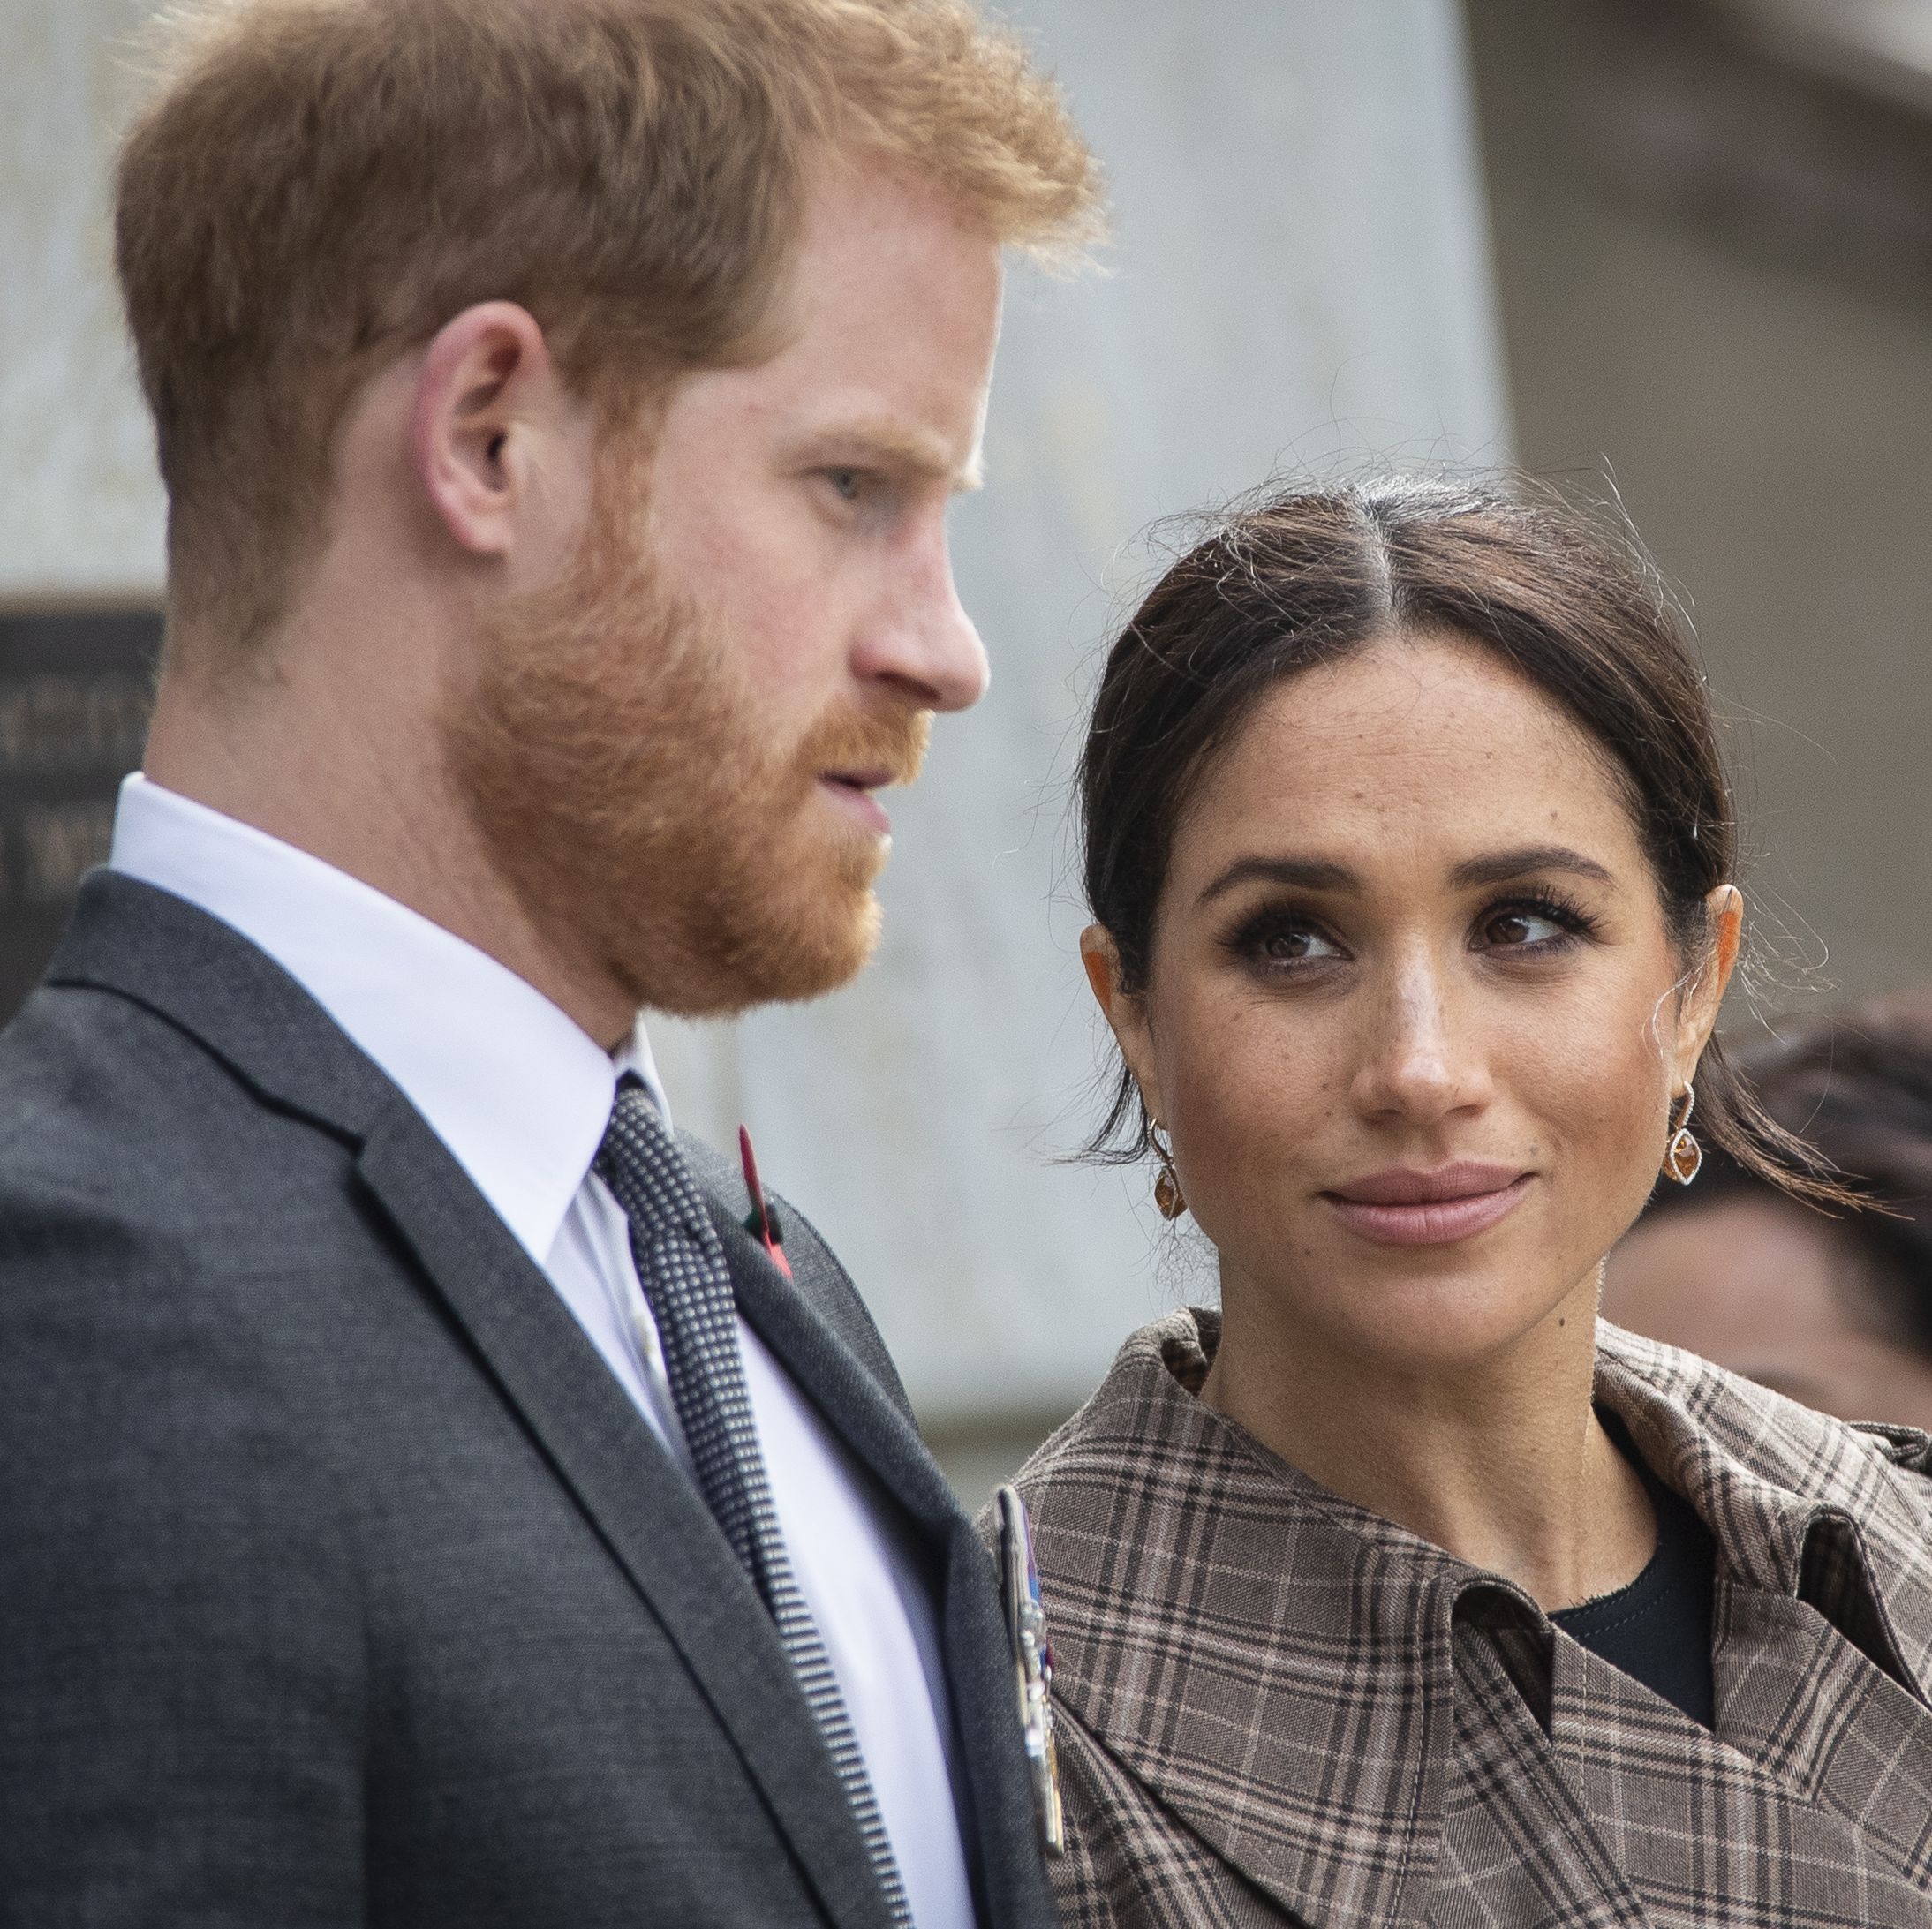 The Duke and Duchess of Sussex are hoping to sit down and discuss the issues raised in their docuseries.